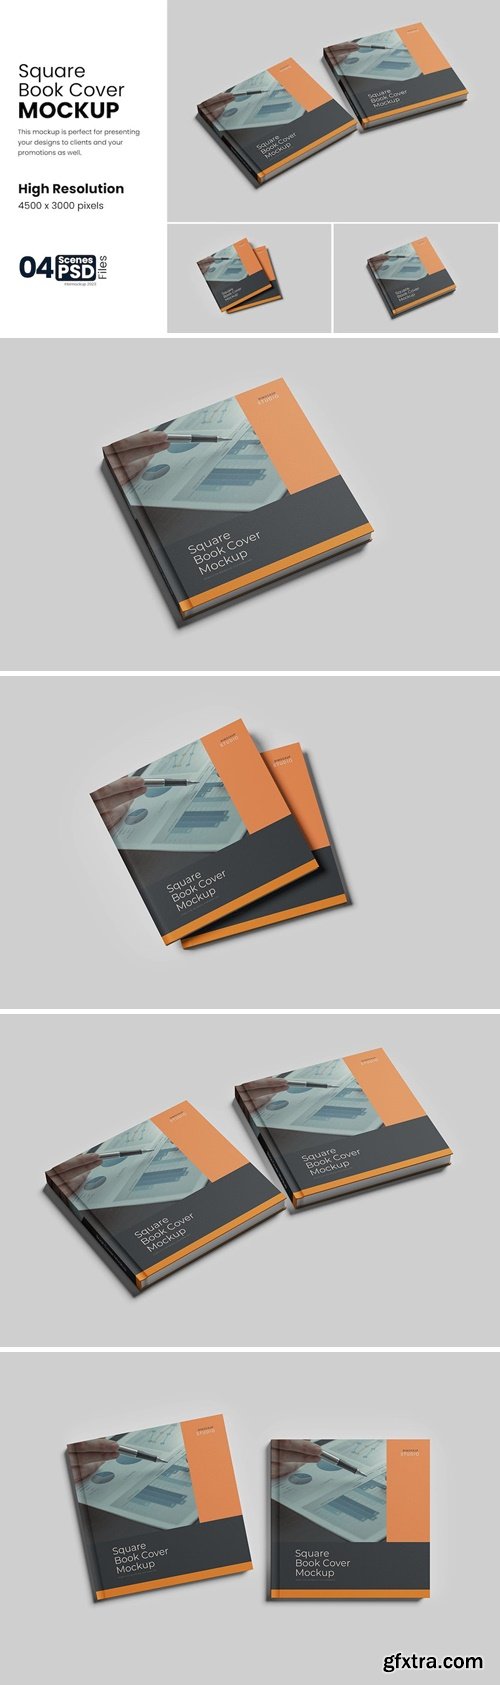 Square Book Cover Mockup 6ZPBAHP